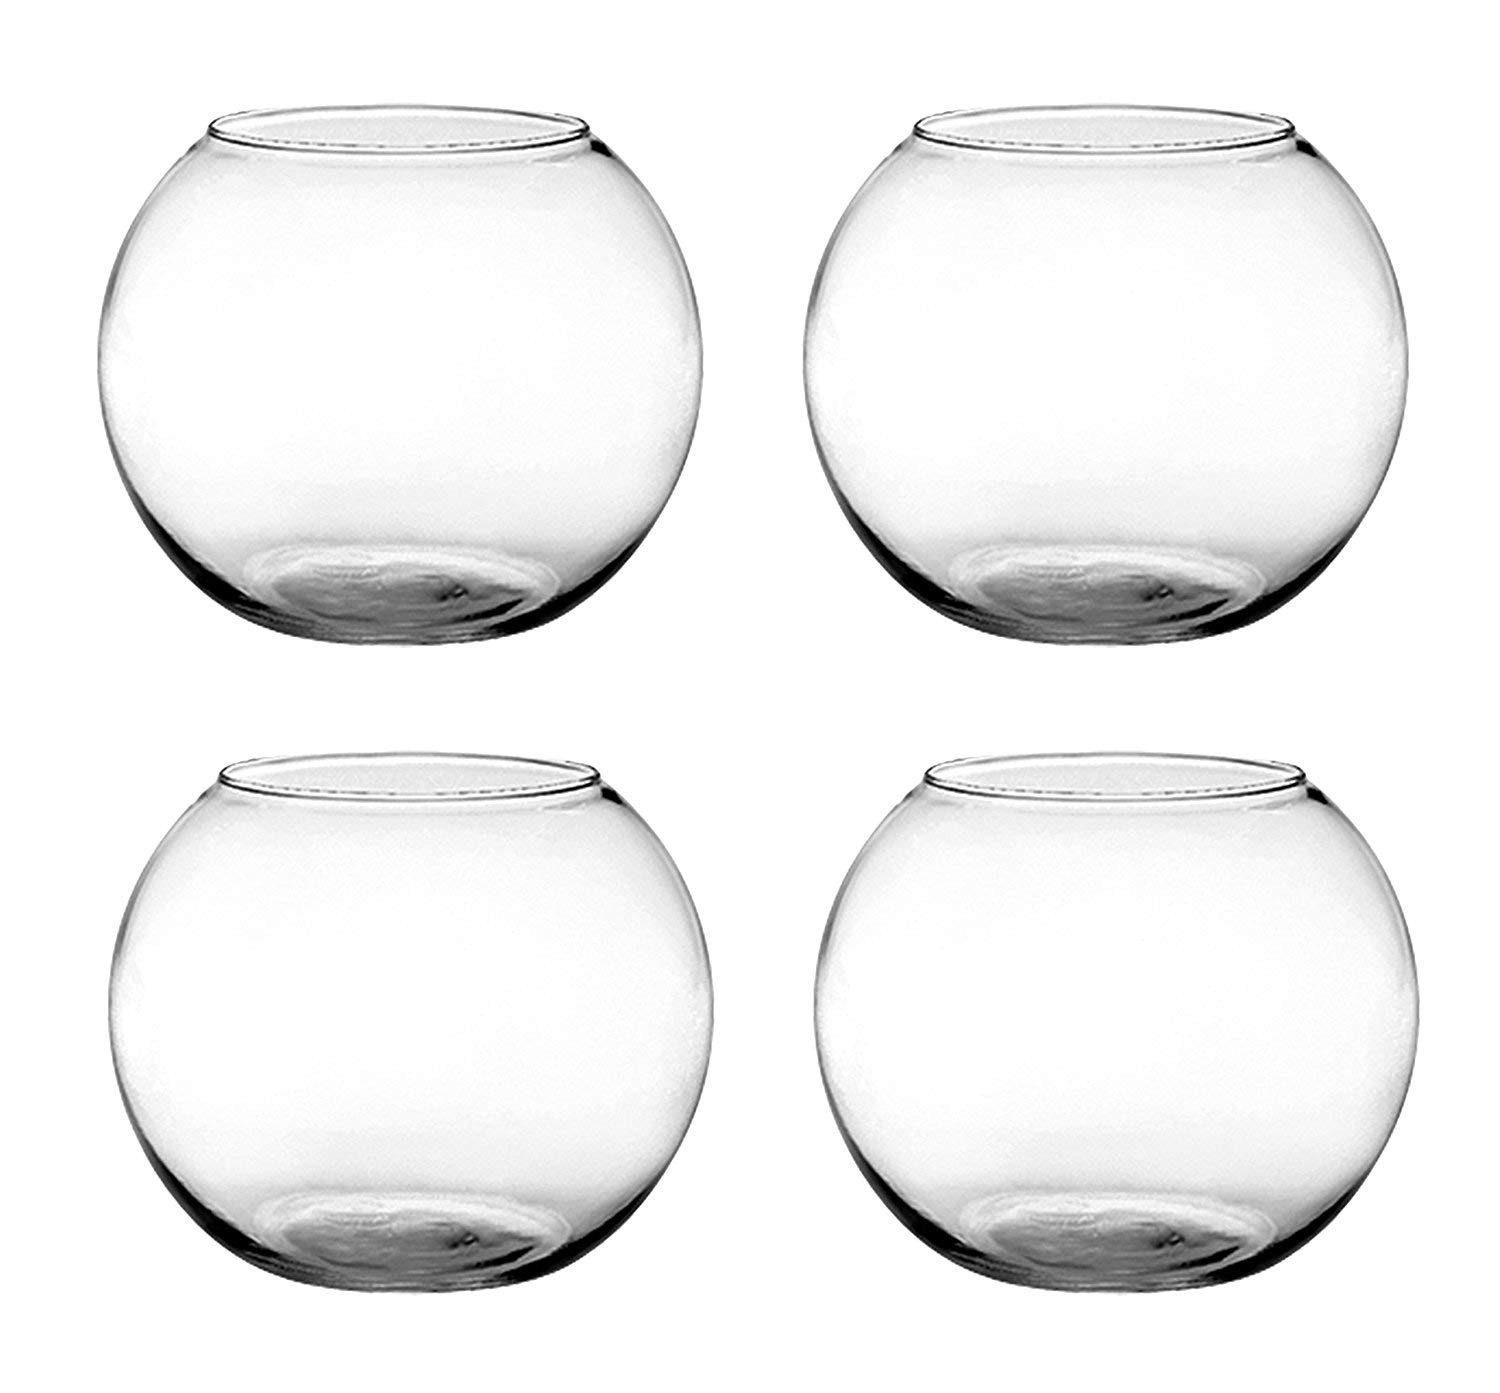 24 Lovable Glass Bubble Fish Bowl Vase 2024 free download glass bubble fish bowl vase of amazon com floral supply online set of 4 6 rose bowls glass with amazon com floral supply online set of 4 6 rose bowls glass round vases for weddings events de